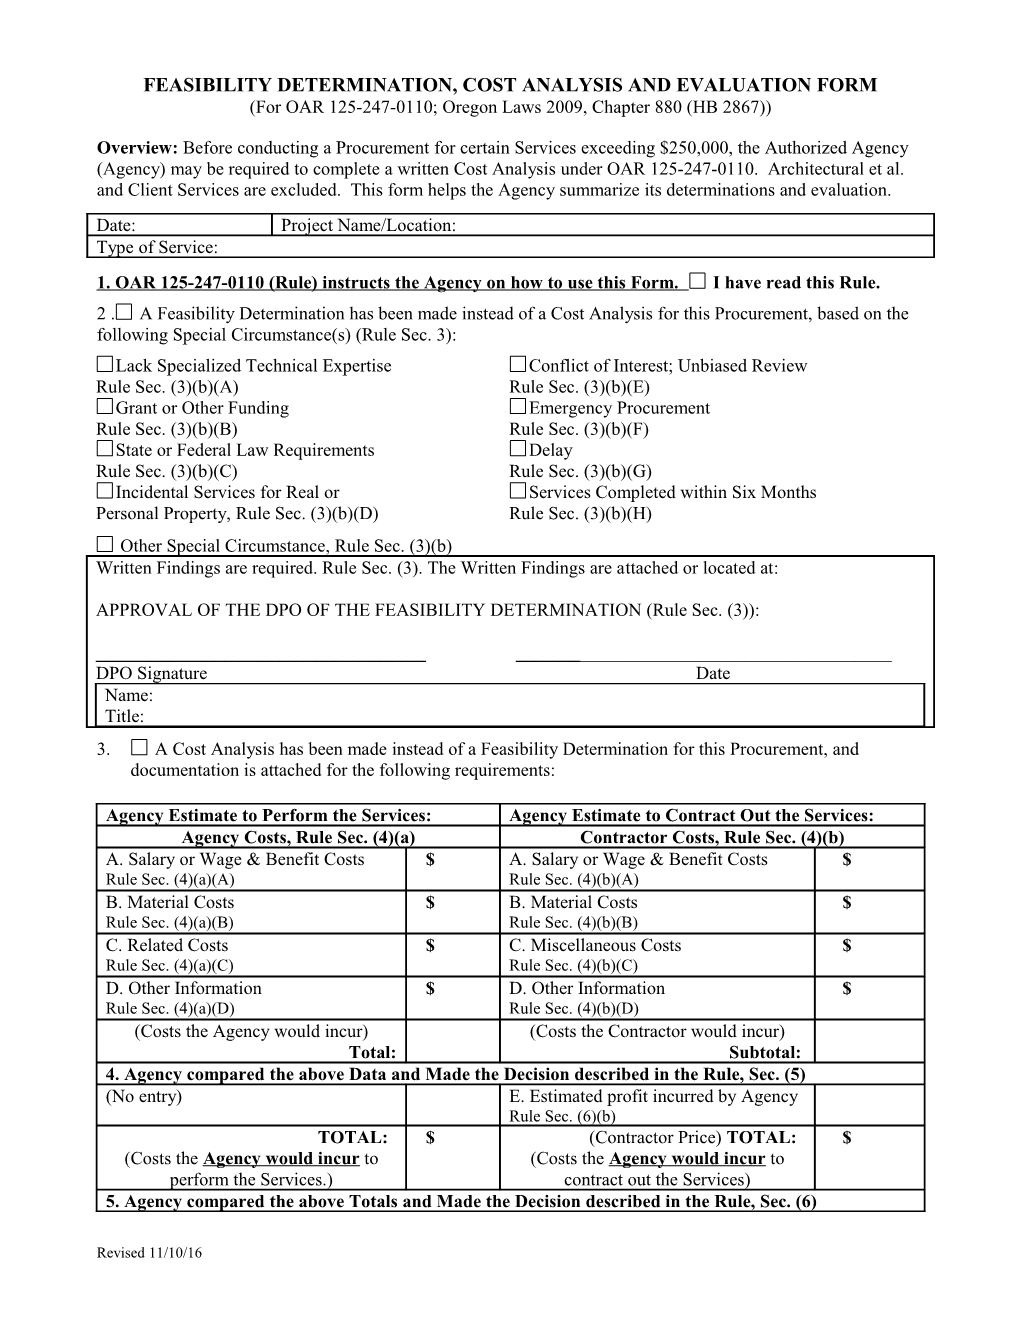 Feasibility Determination, Cost Analysis & Evaluation Form (HB2867)